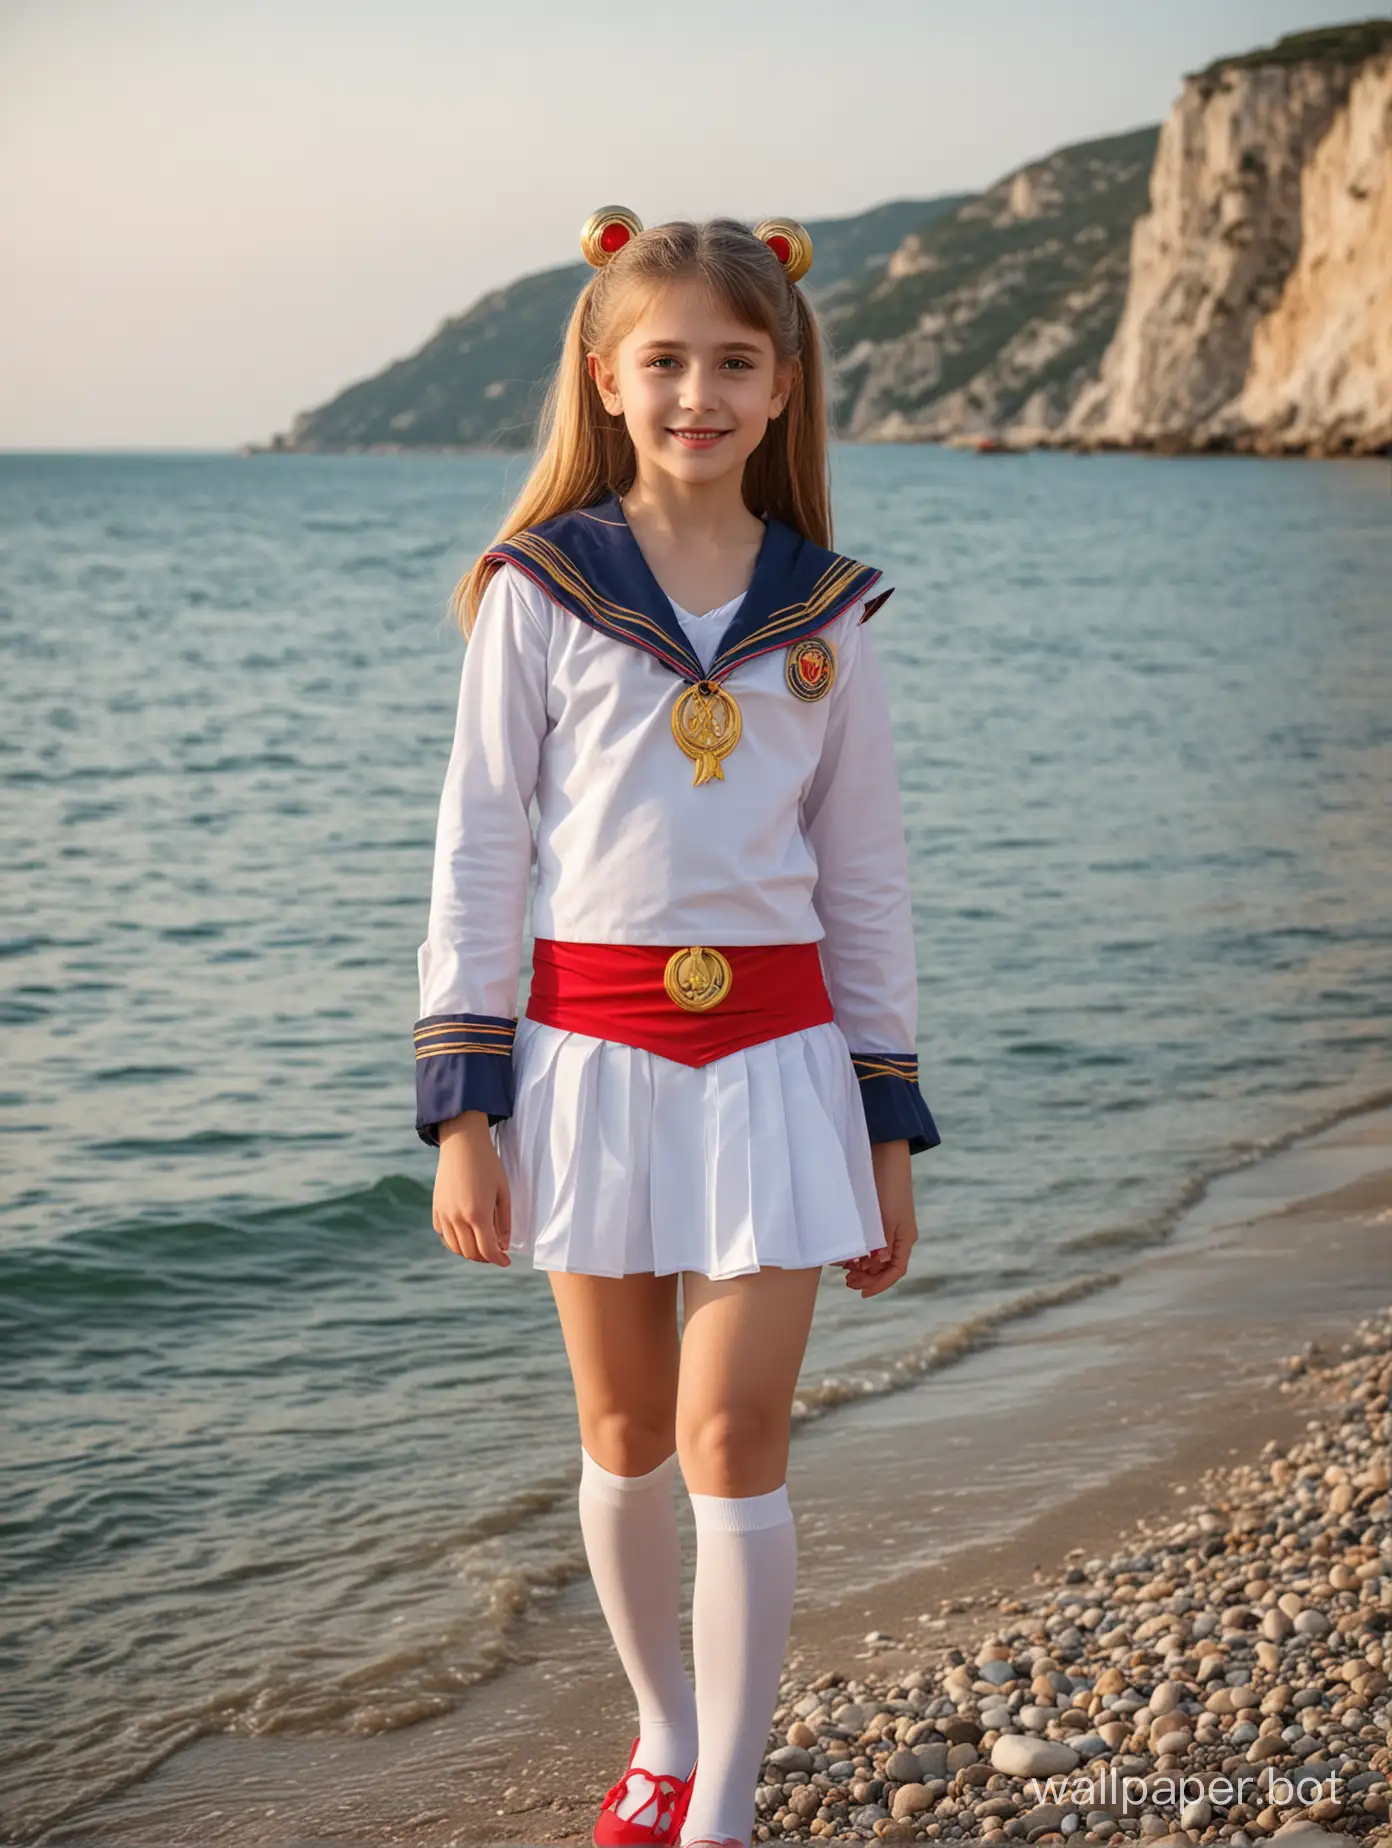 A beautiful girl of 10 years old in Crimea by the sea in a Sailor Moon costume, full-length, children of various ages around, dynamic poses, posing, smiling